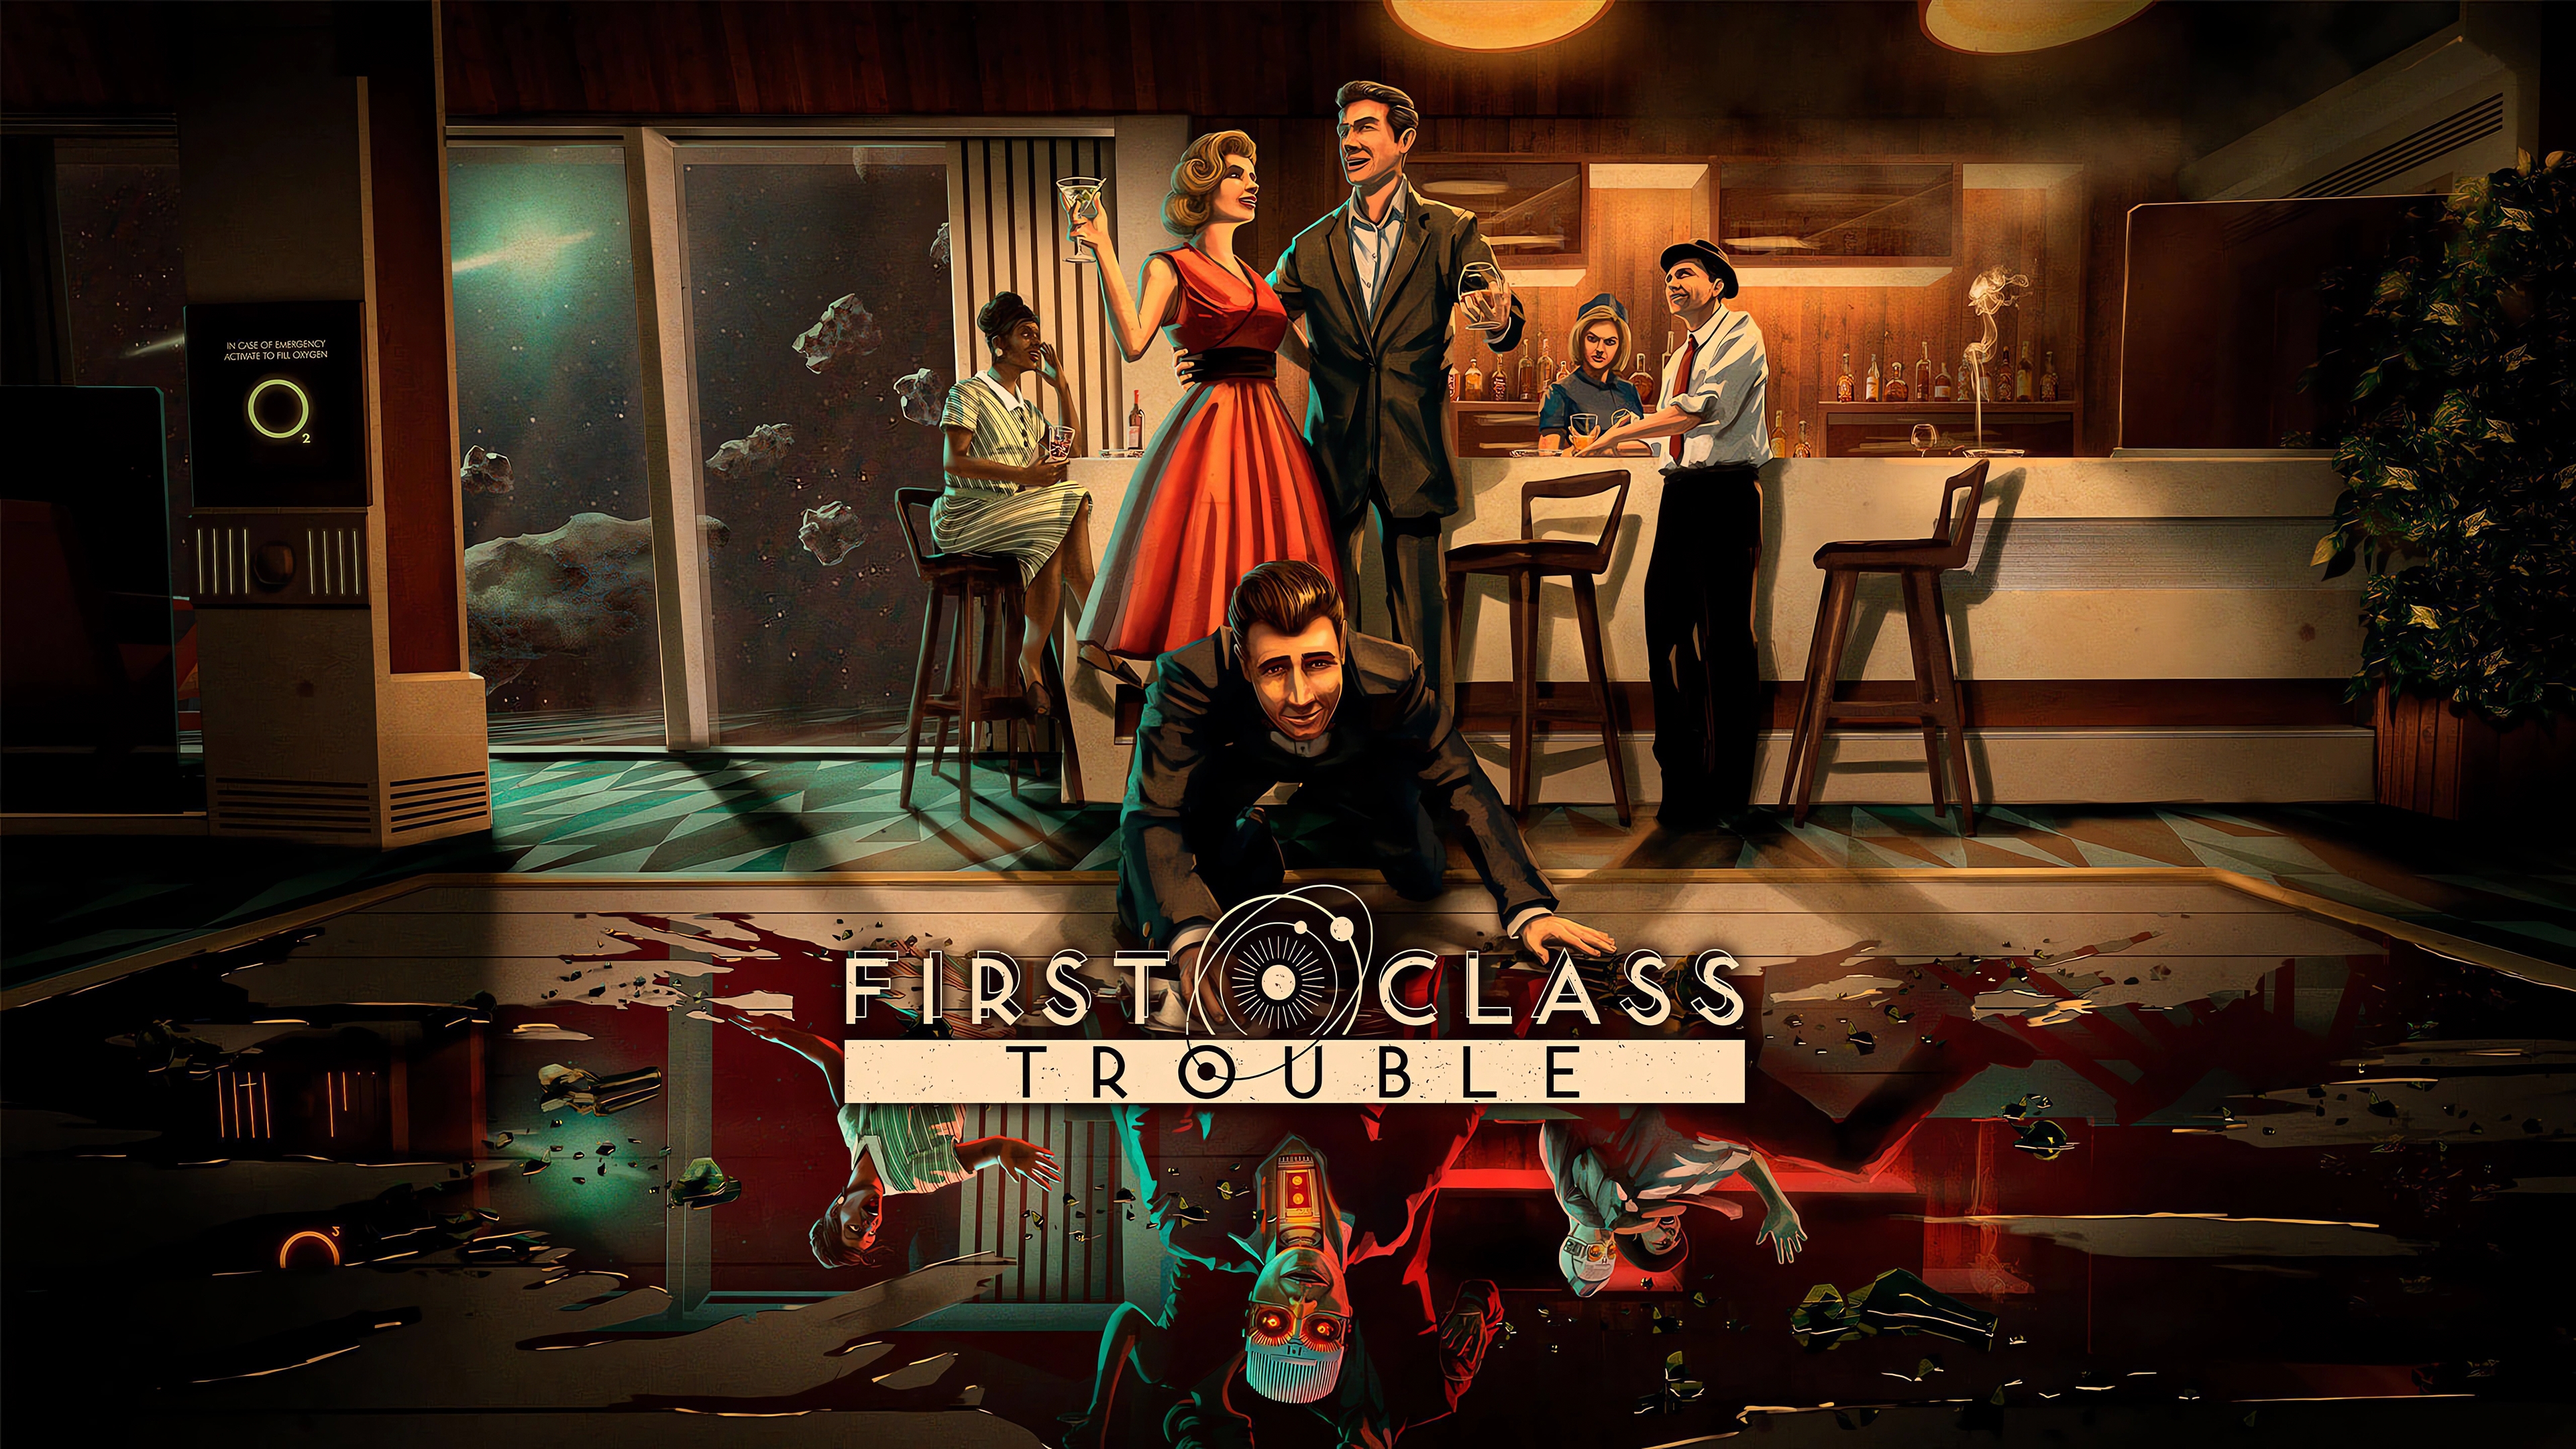 1 game store. First class Trouble. First class игра. Trouble игра. First class Trouble лого.